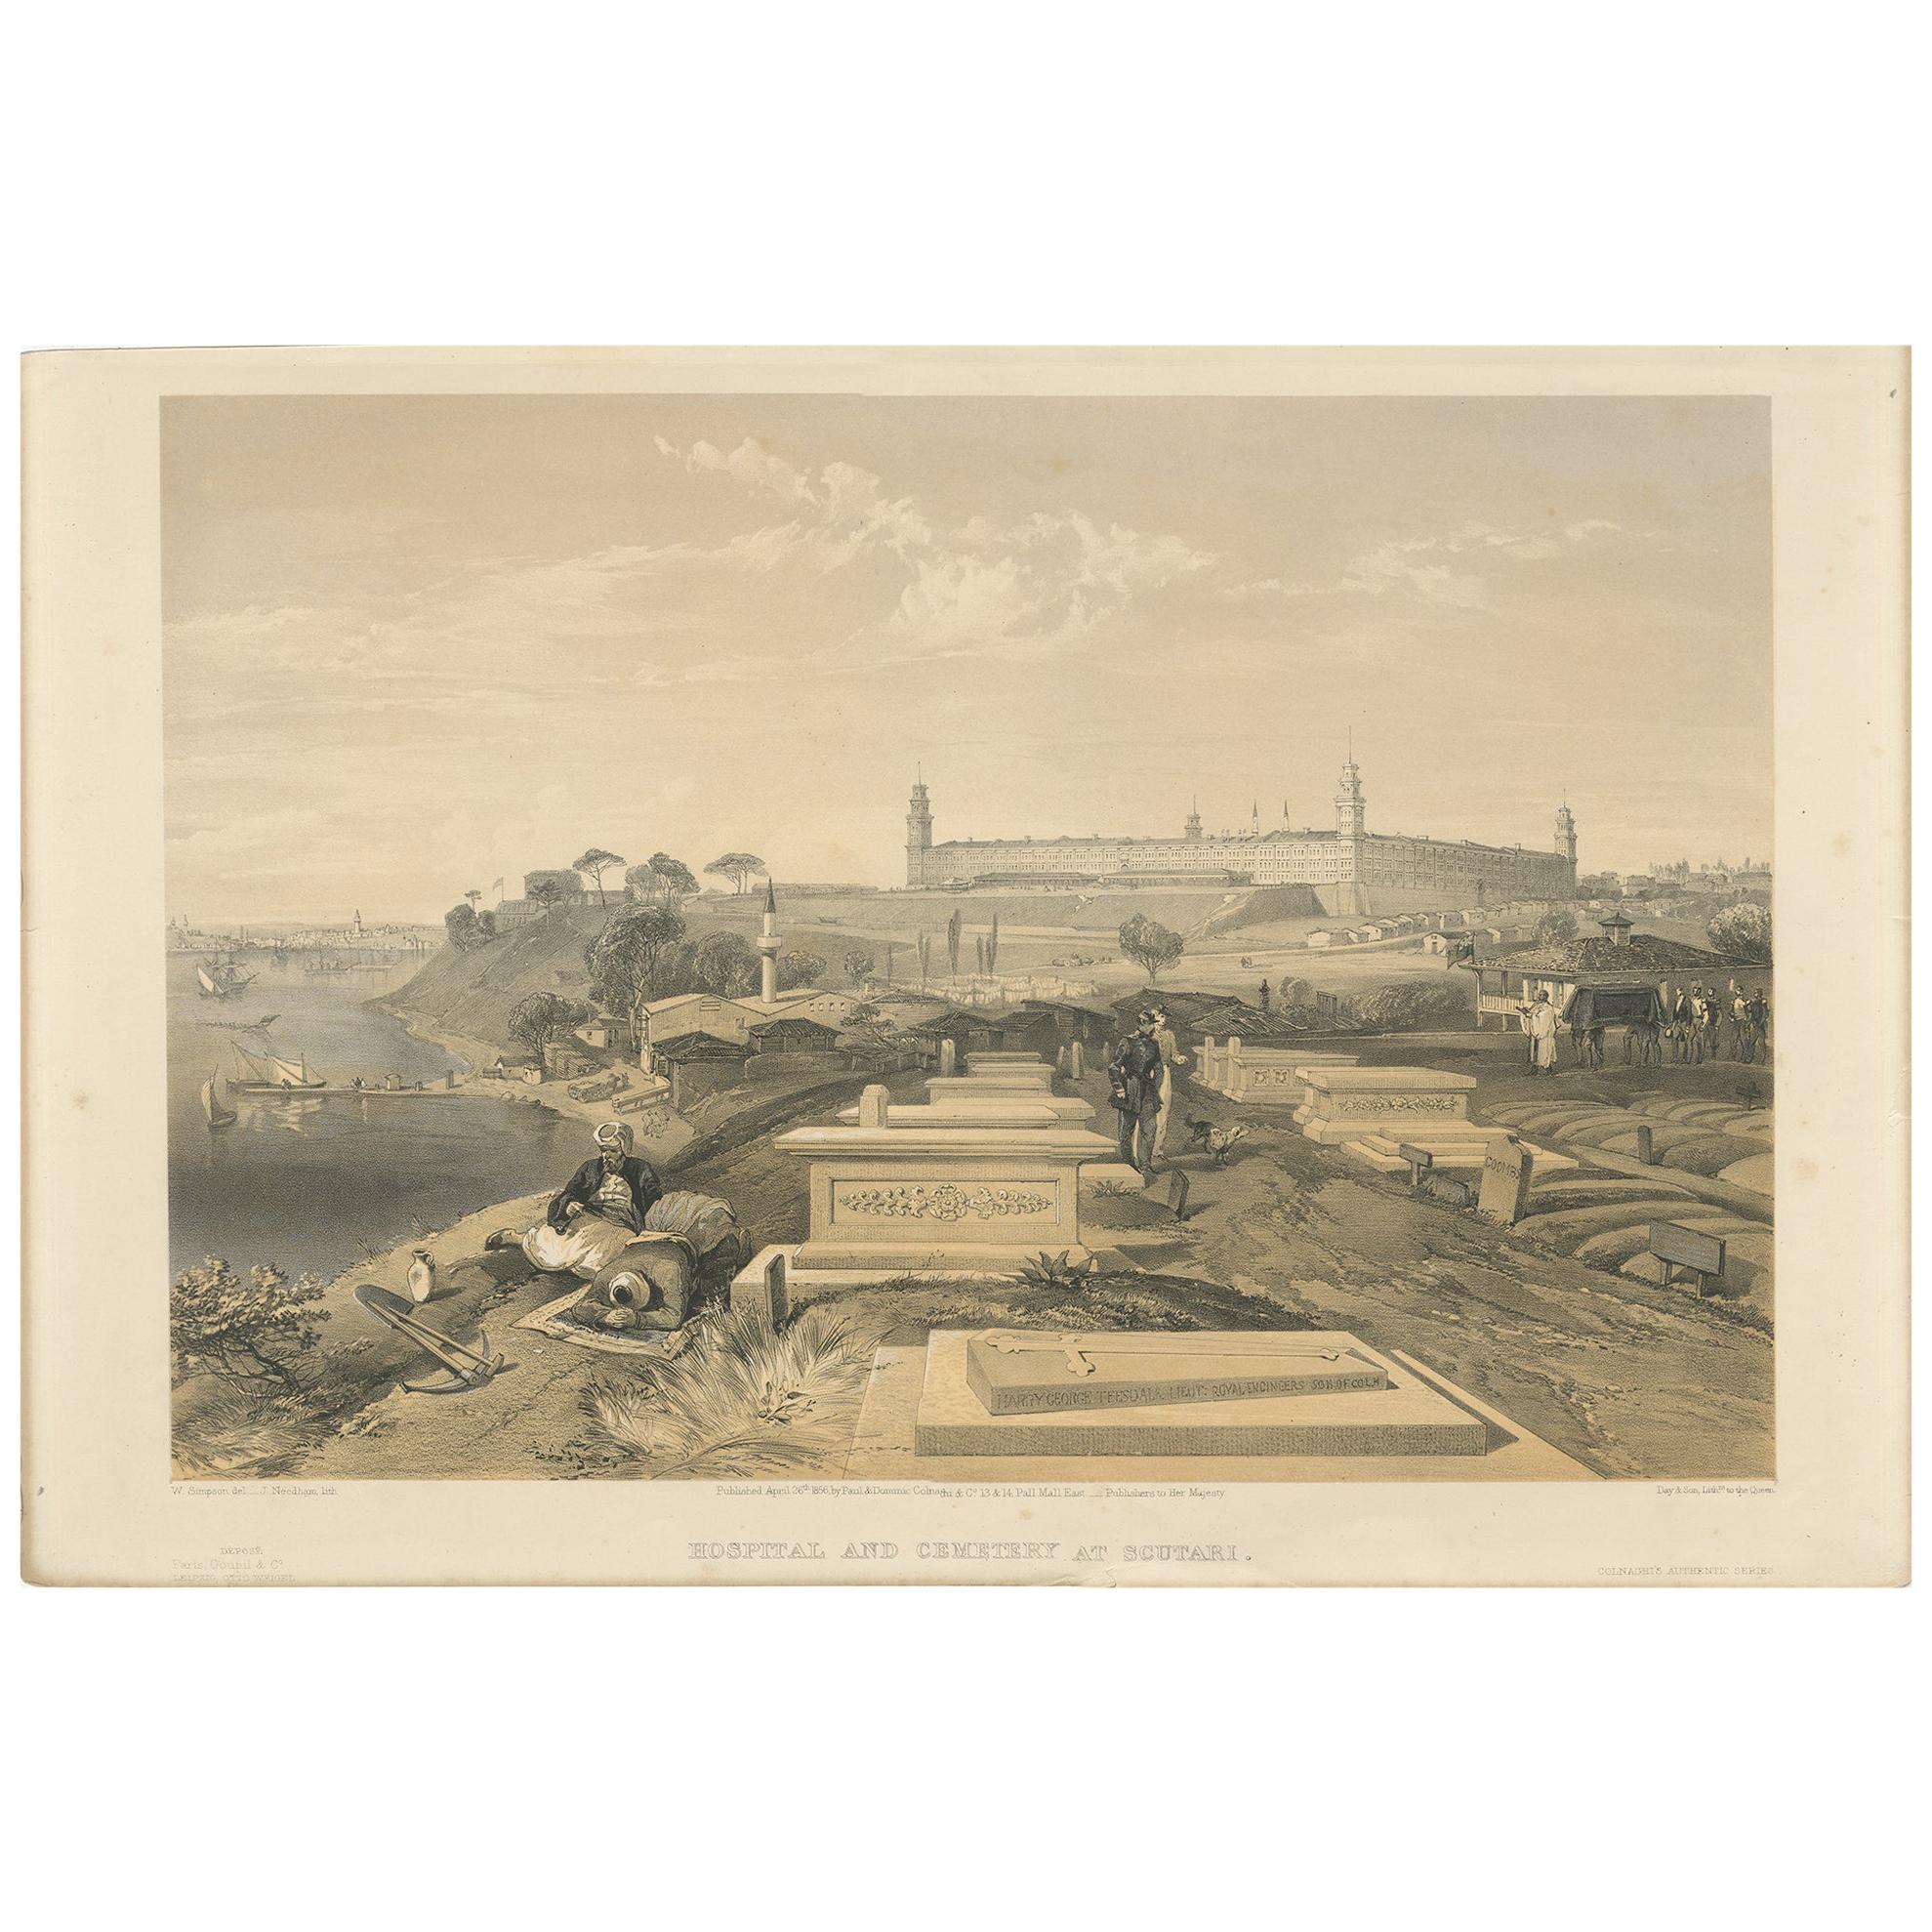 Antique Print of a Hospital and Cemetery at Scutari by Colnaghi, 1856